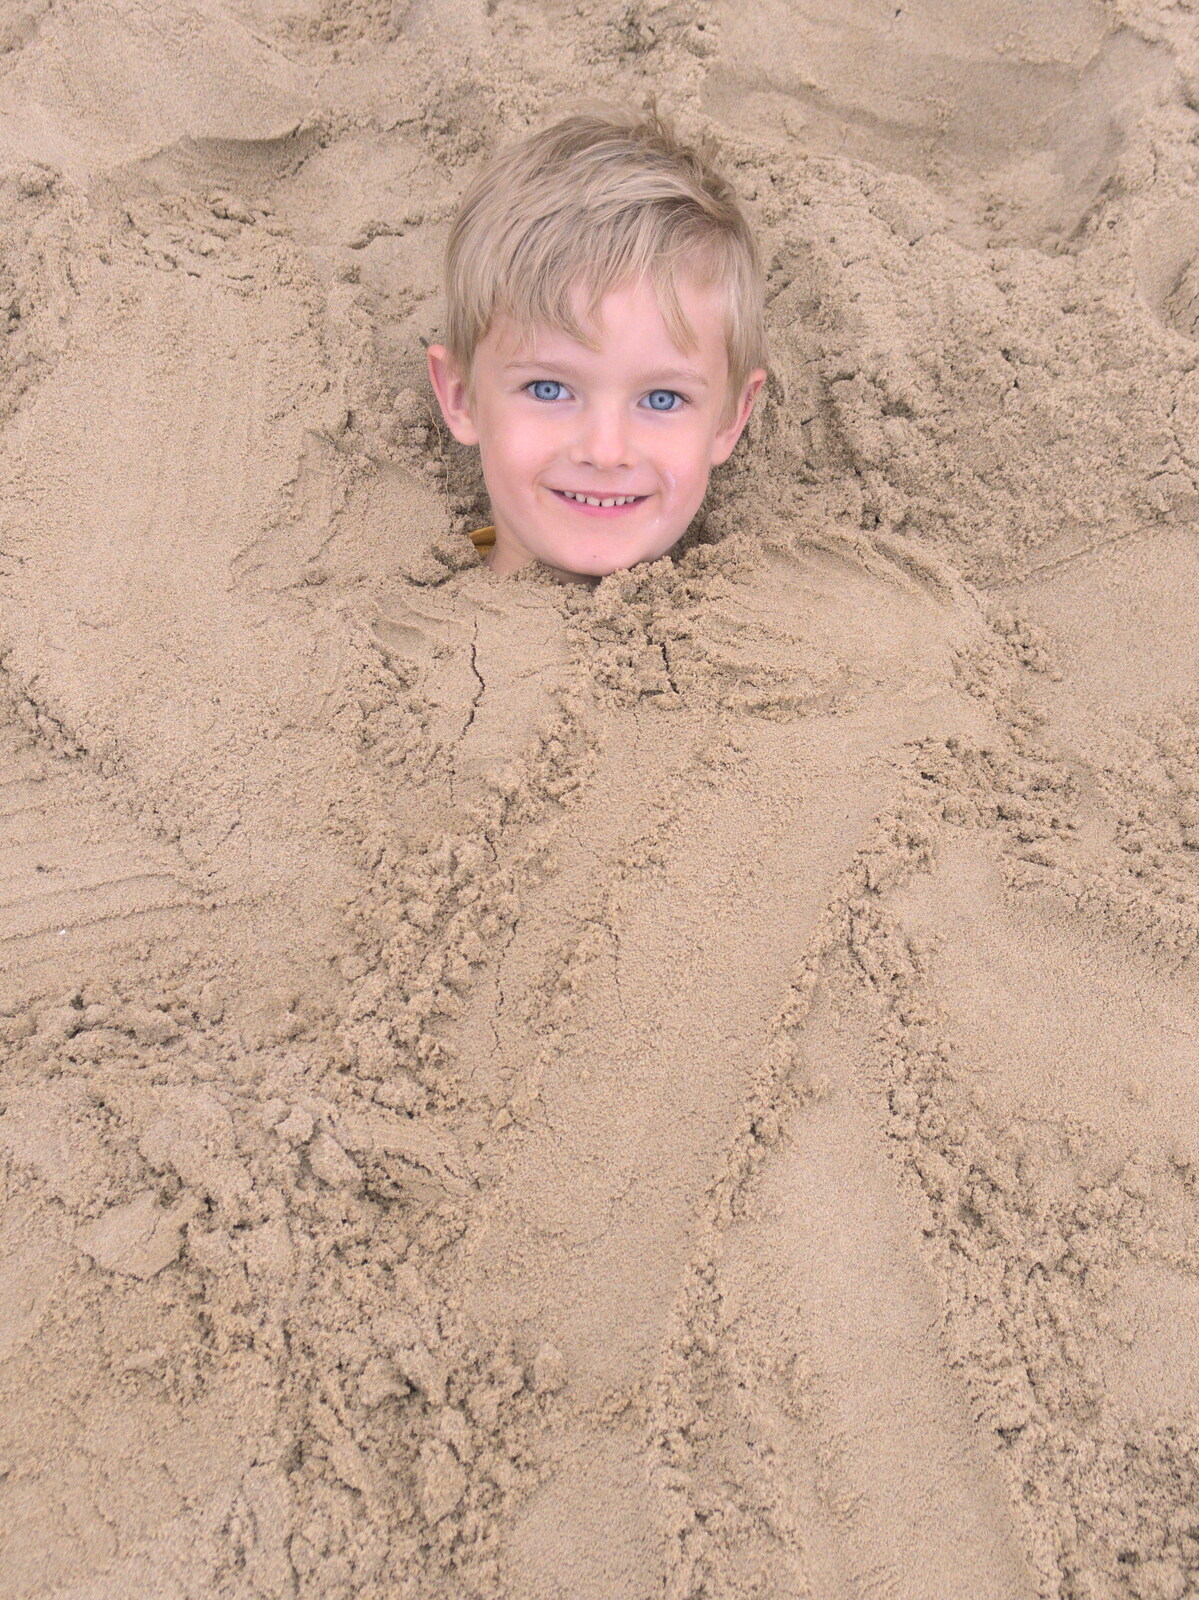 Harry's buried in sand from A Wet Day at the Beach, Sea Palling, Norfolk - 16th July 2017